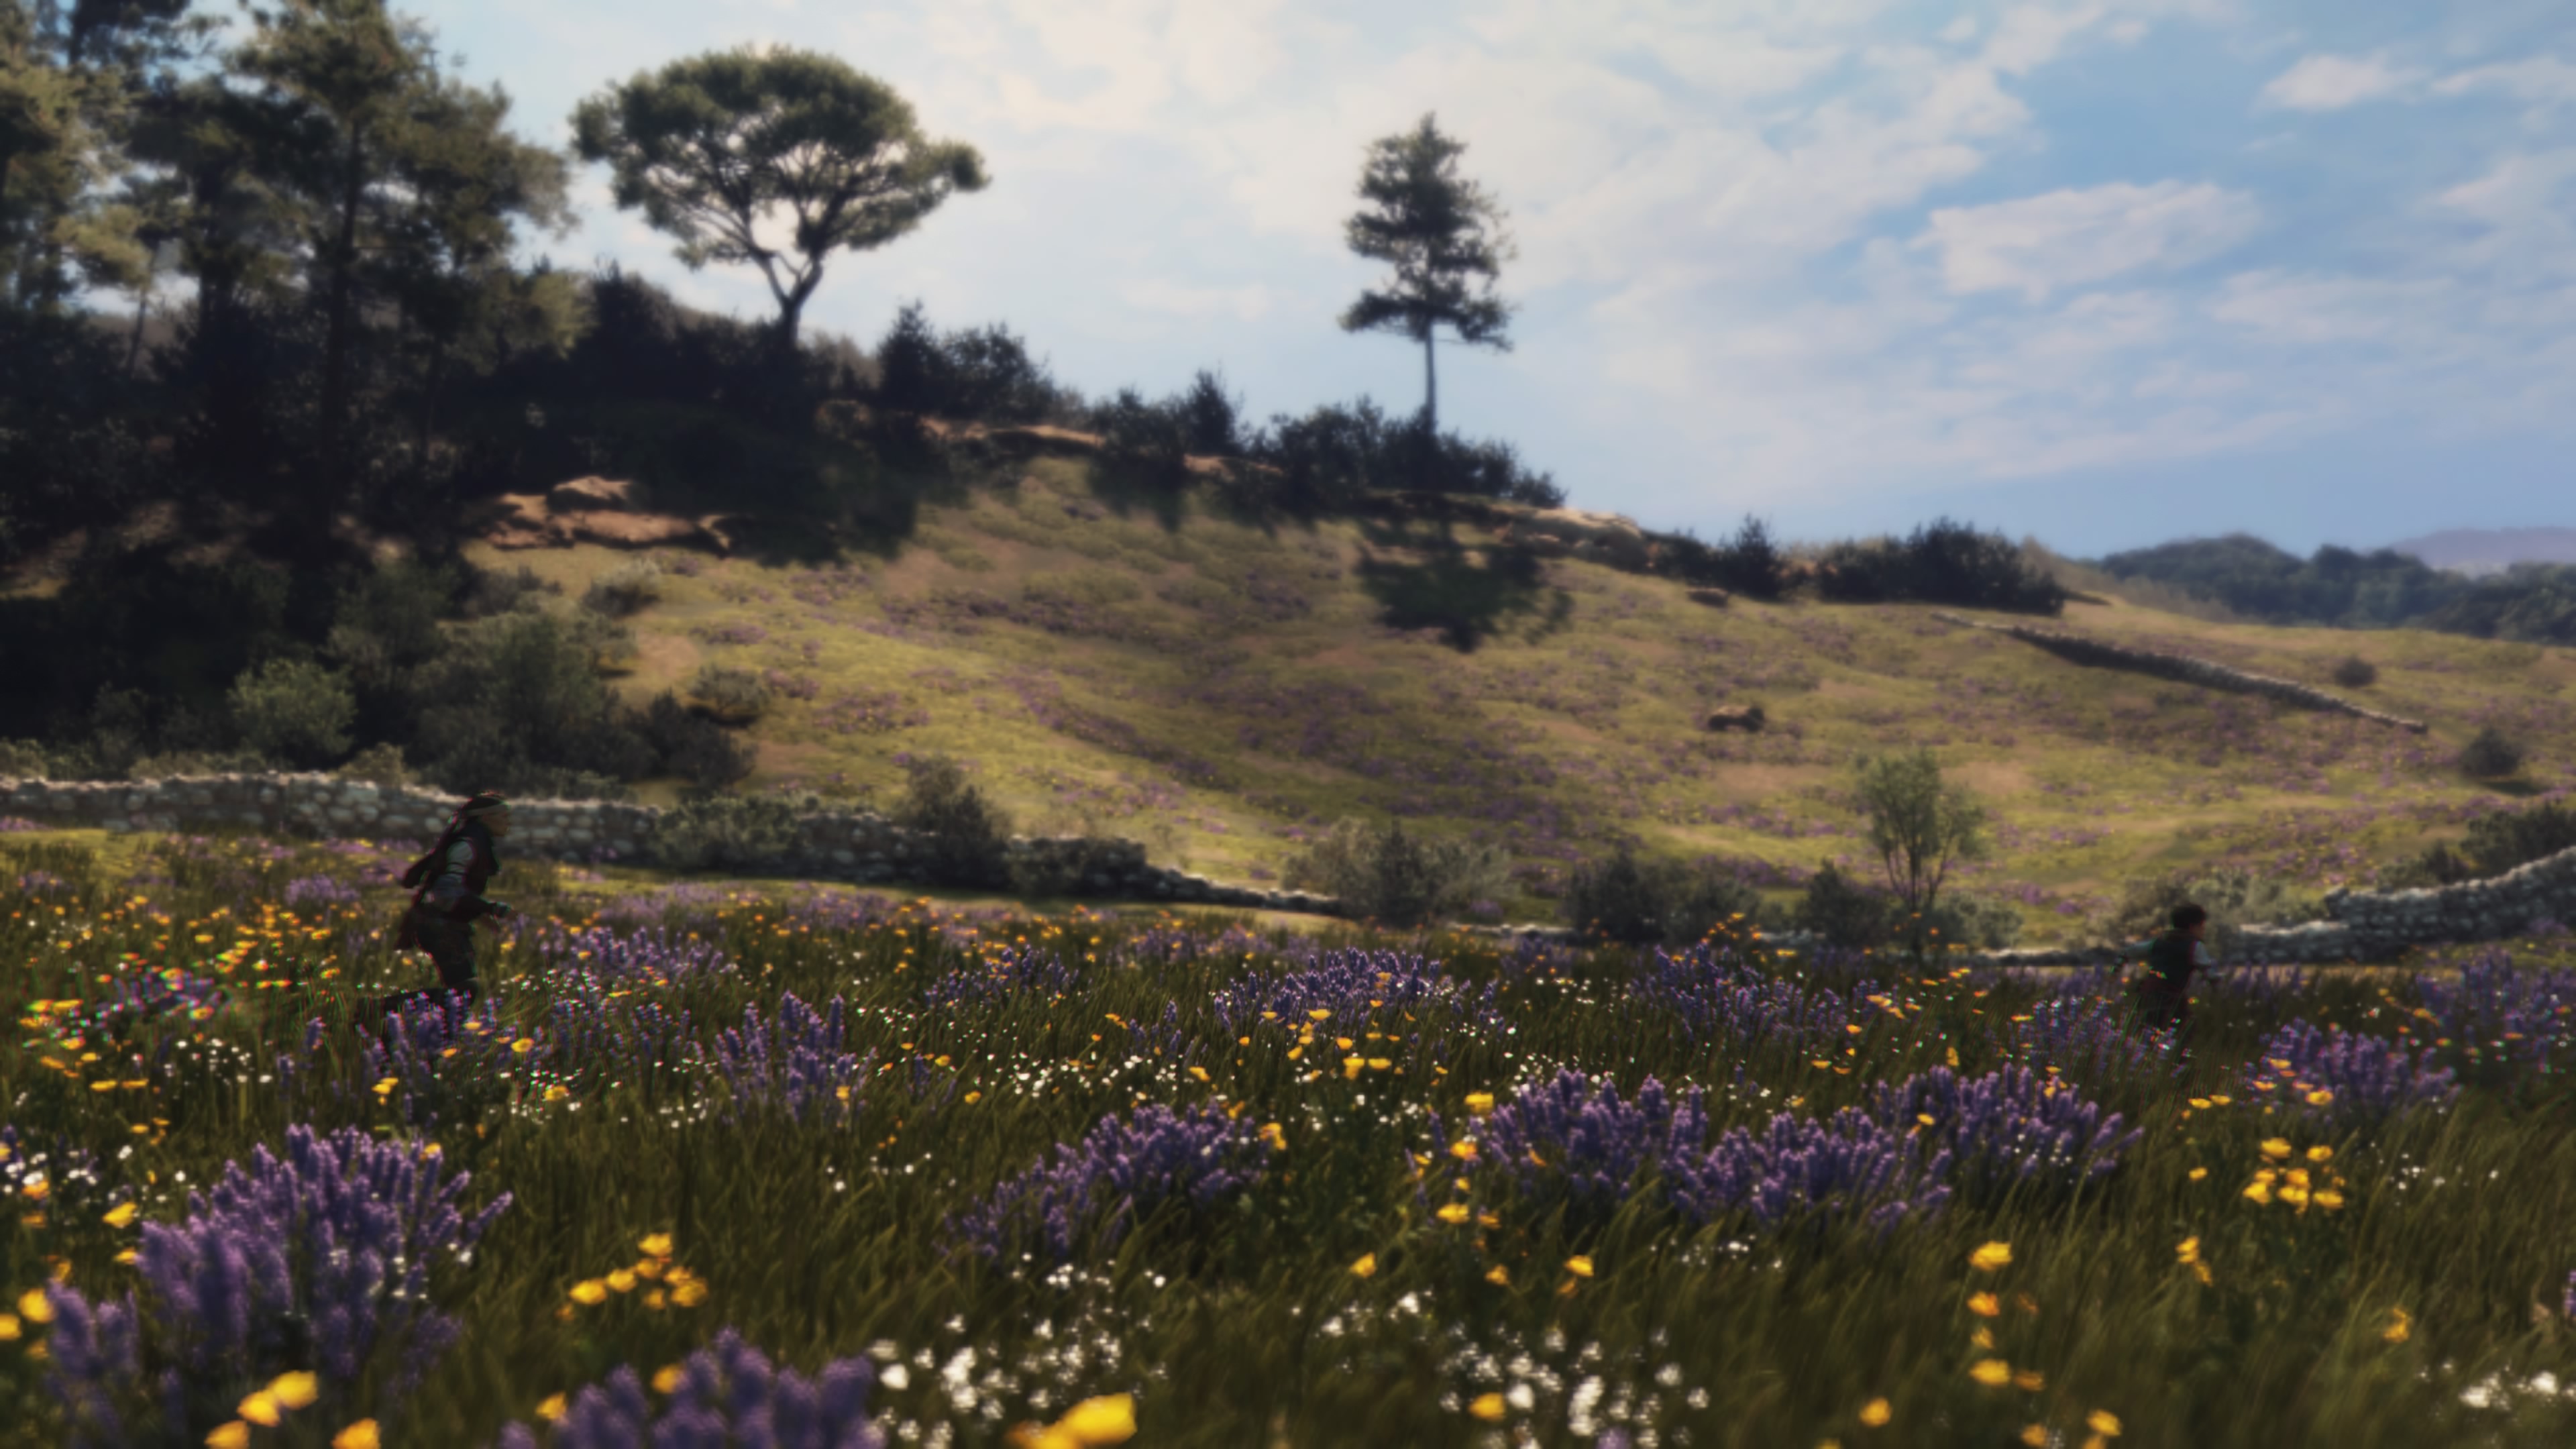 General 3840x2160 A Plague Tale Requiem video games Asobo Studio video game art flowers video game characters trees CGI landscape